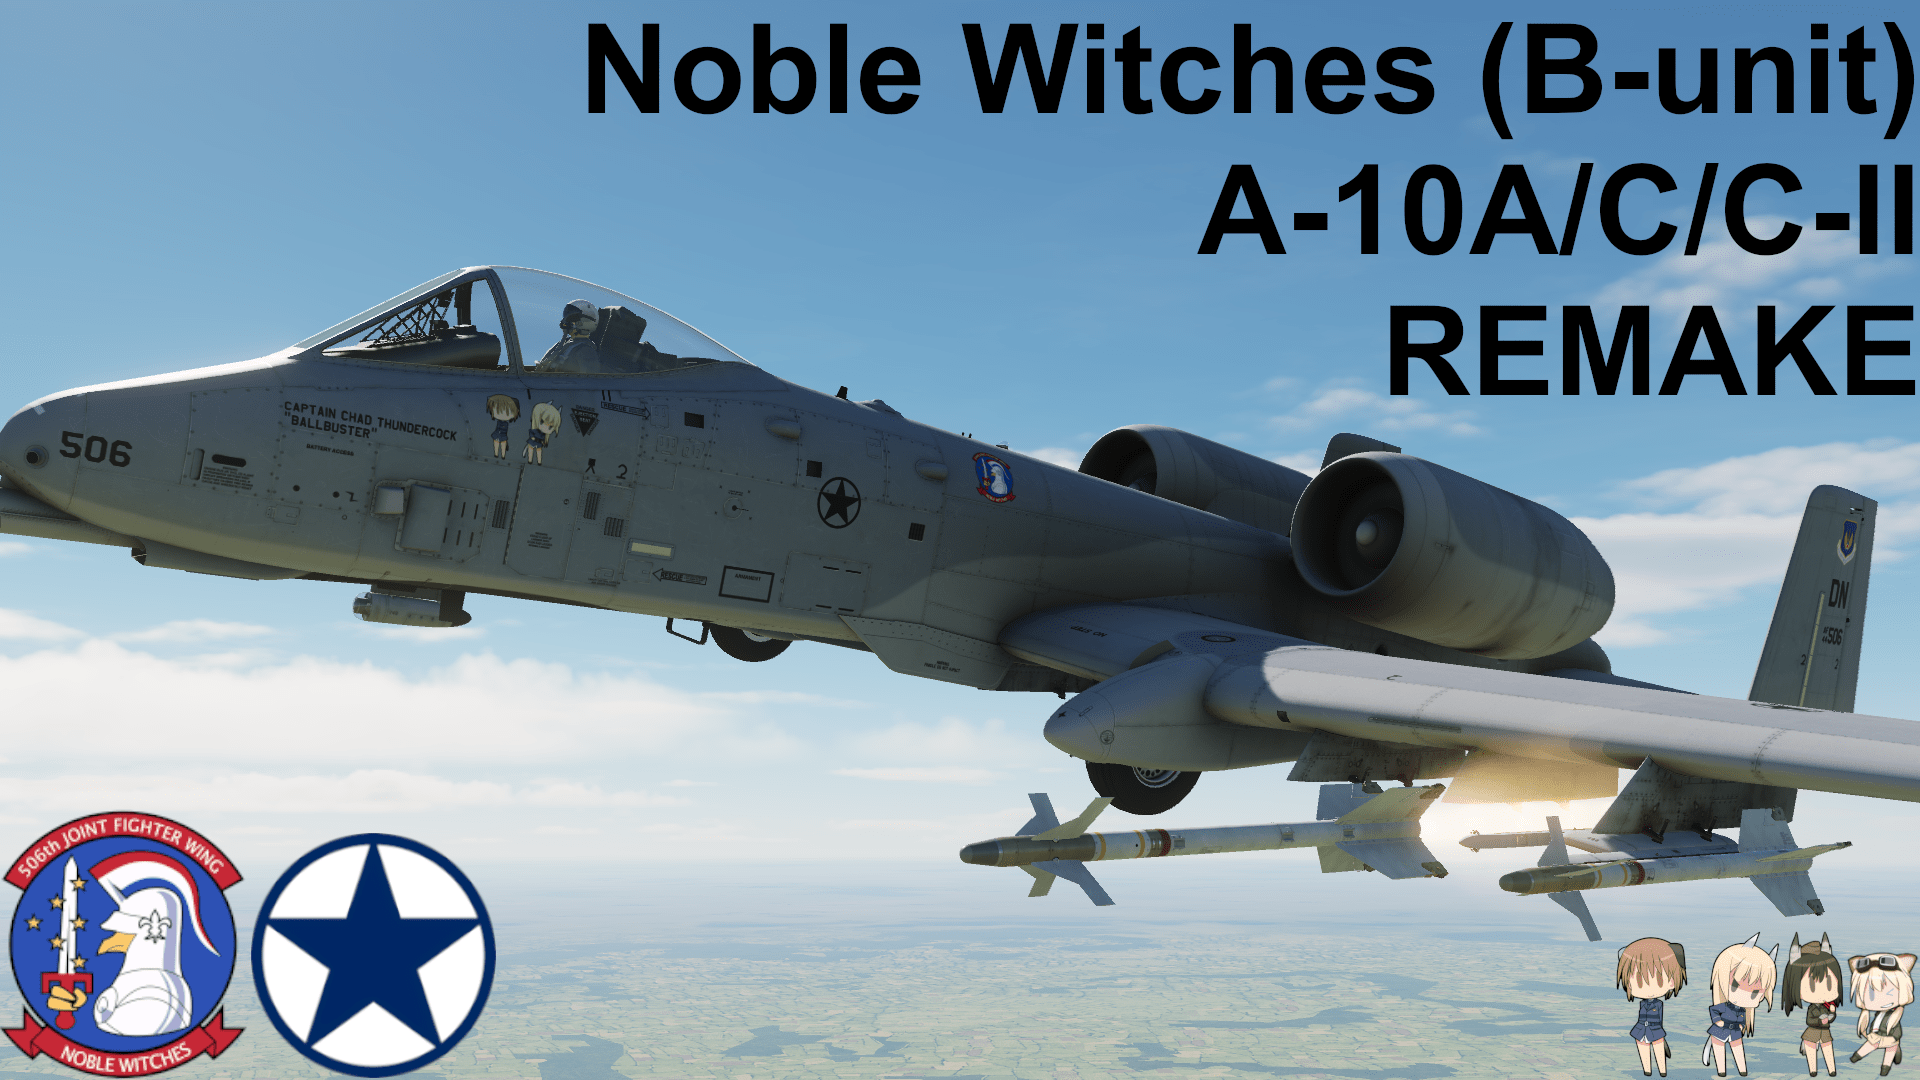 (REMAKE) World Witches - 506th JFW "Noble Witches (B-unit)" A-10A/C/C-II